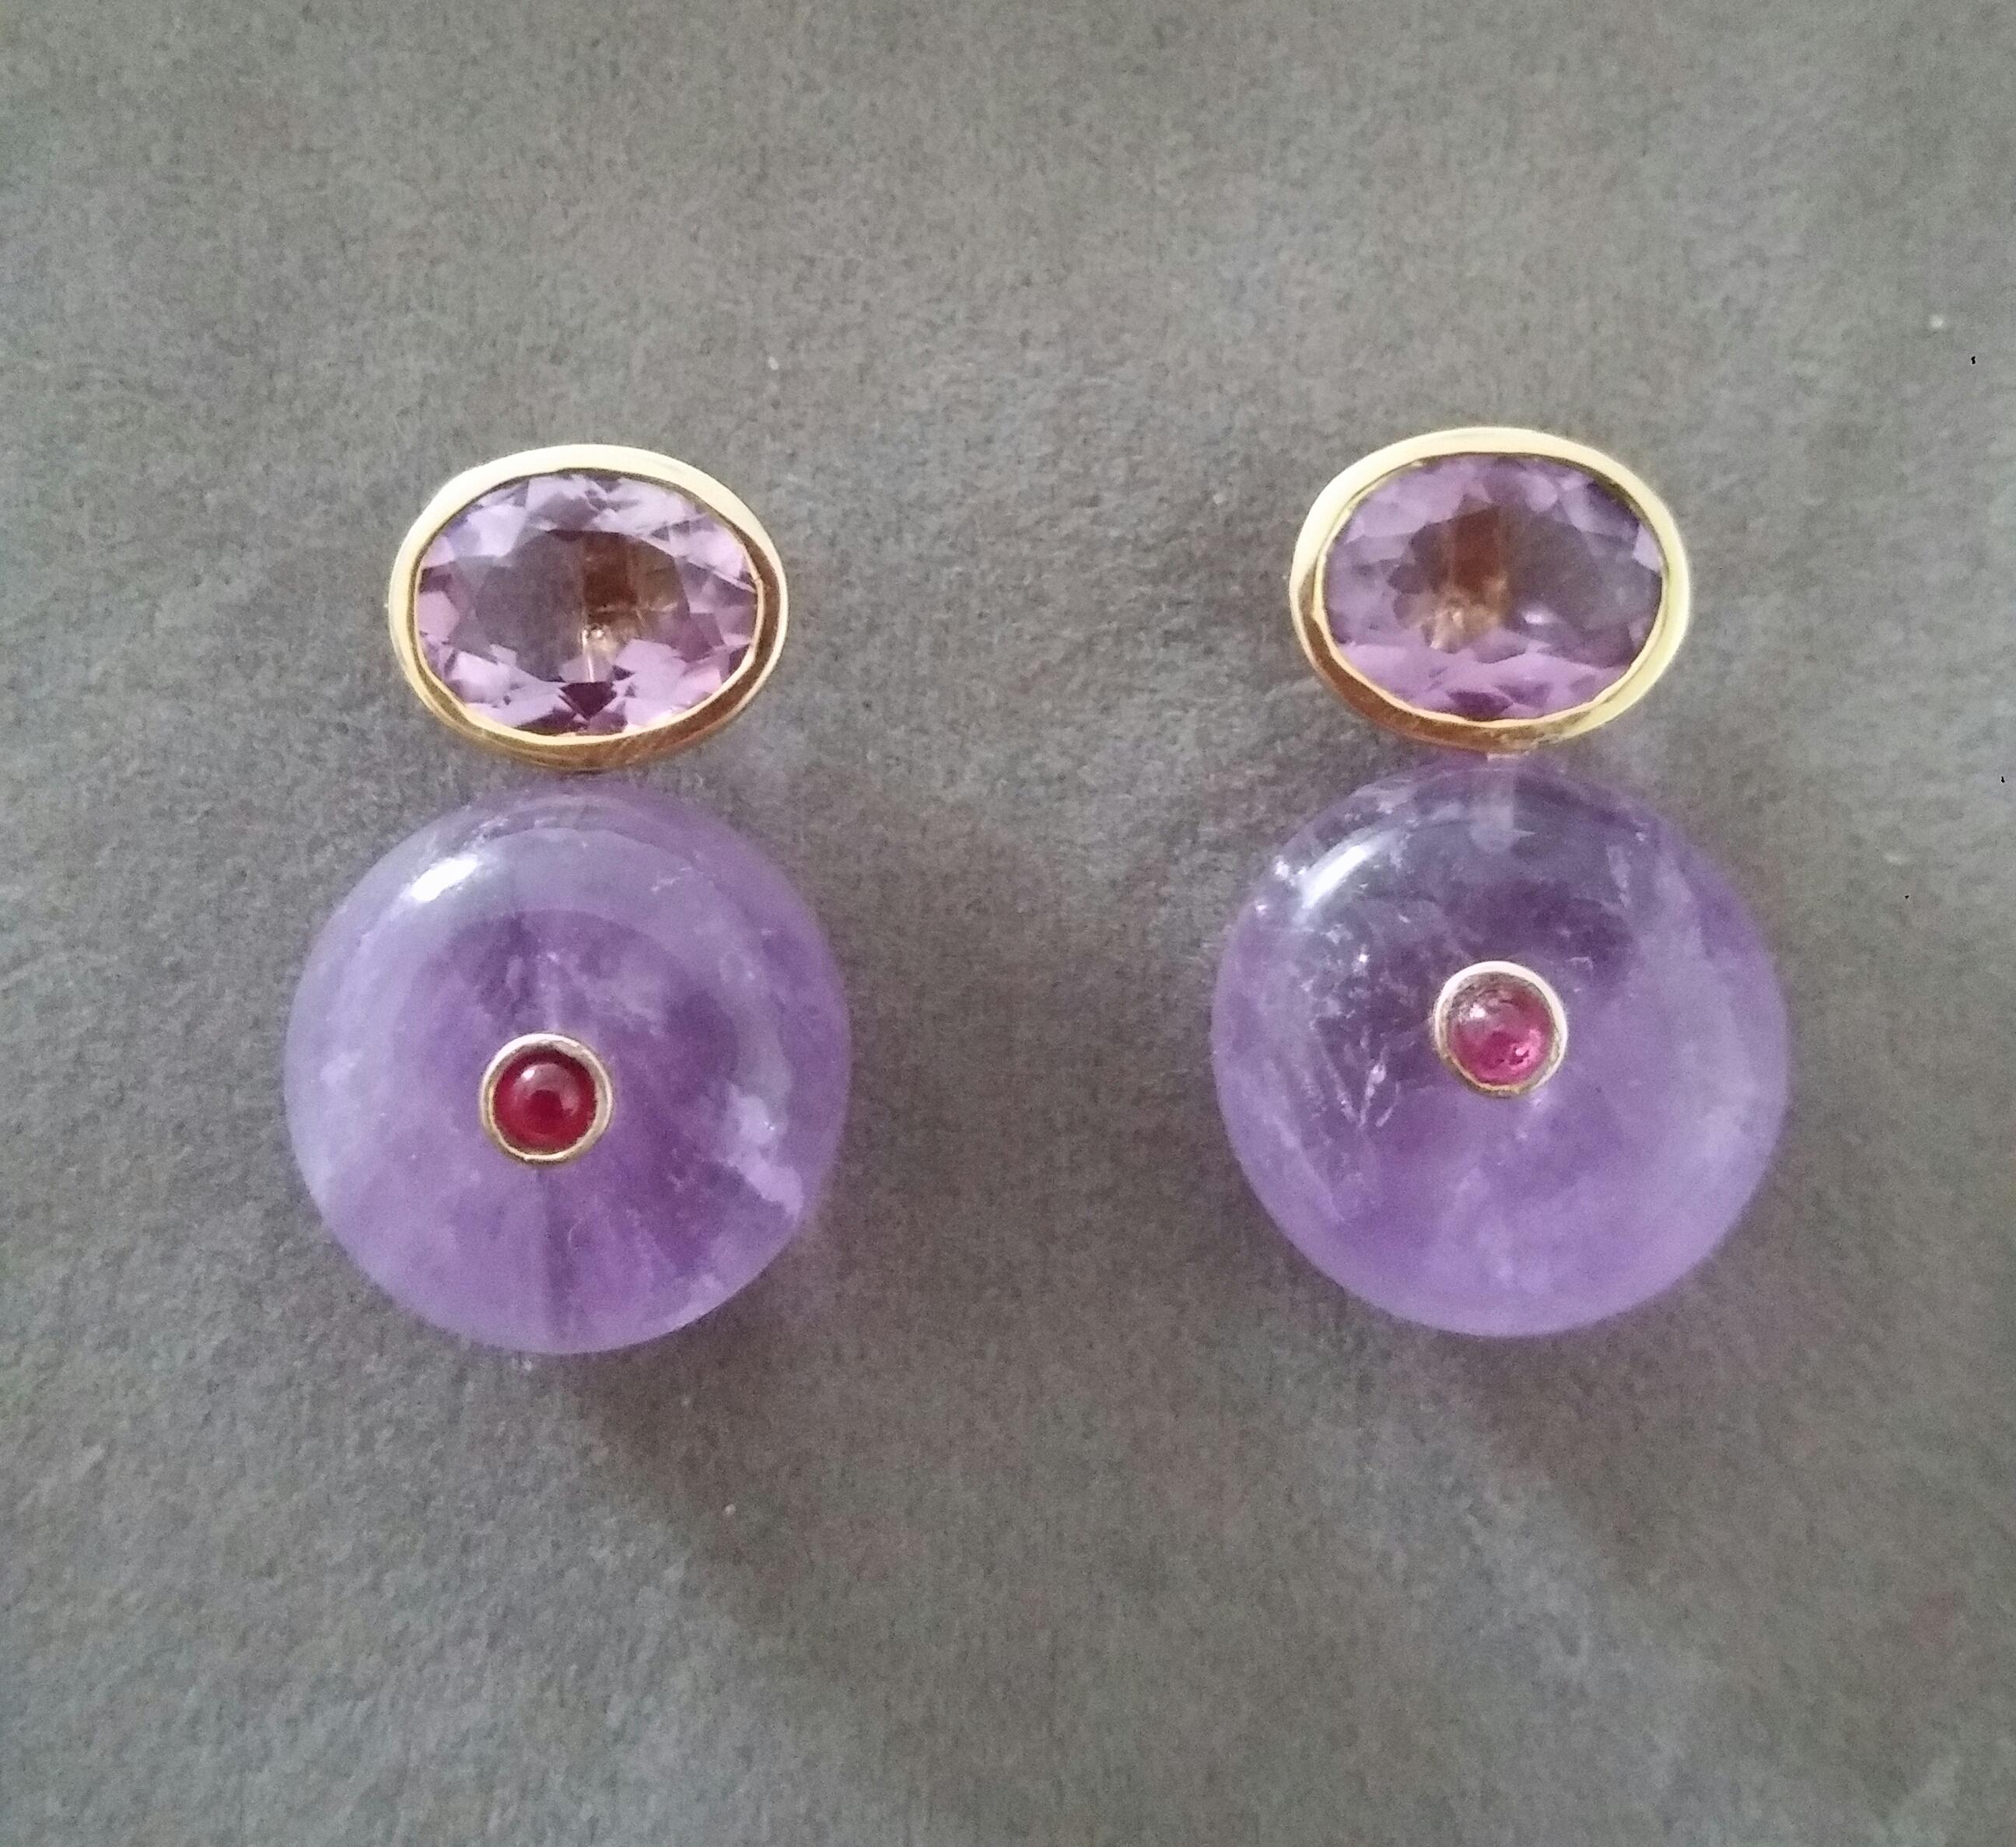 Simple chic stud earrings with a pair of Oval Cut Amethyst measuring 8mm x10 mm set in solid 14 Kt. yellow gold on the top and in the lower parts 2 Round Plain Wheel Shape Amethyst  16 mm .in diameter with a small round Ruby cab in the center
In